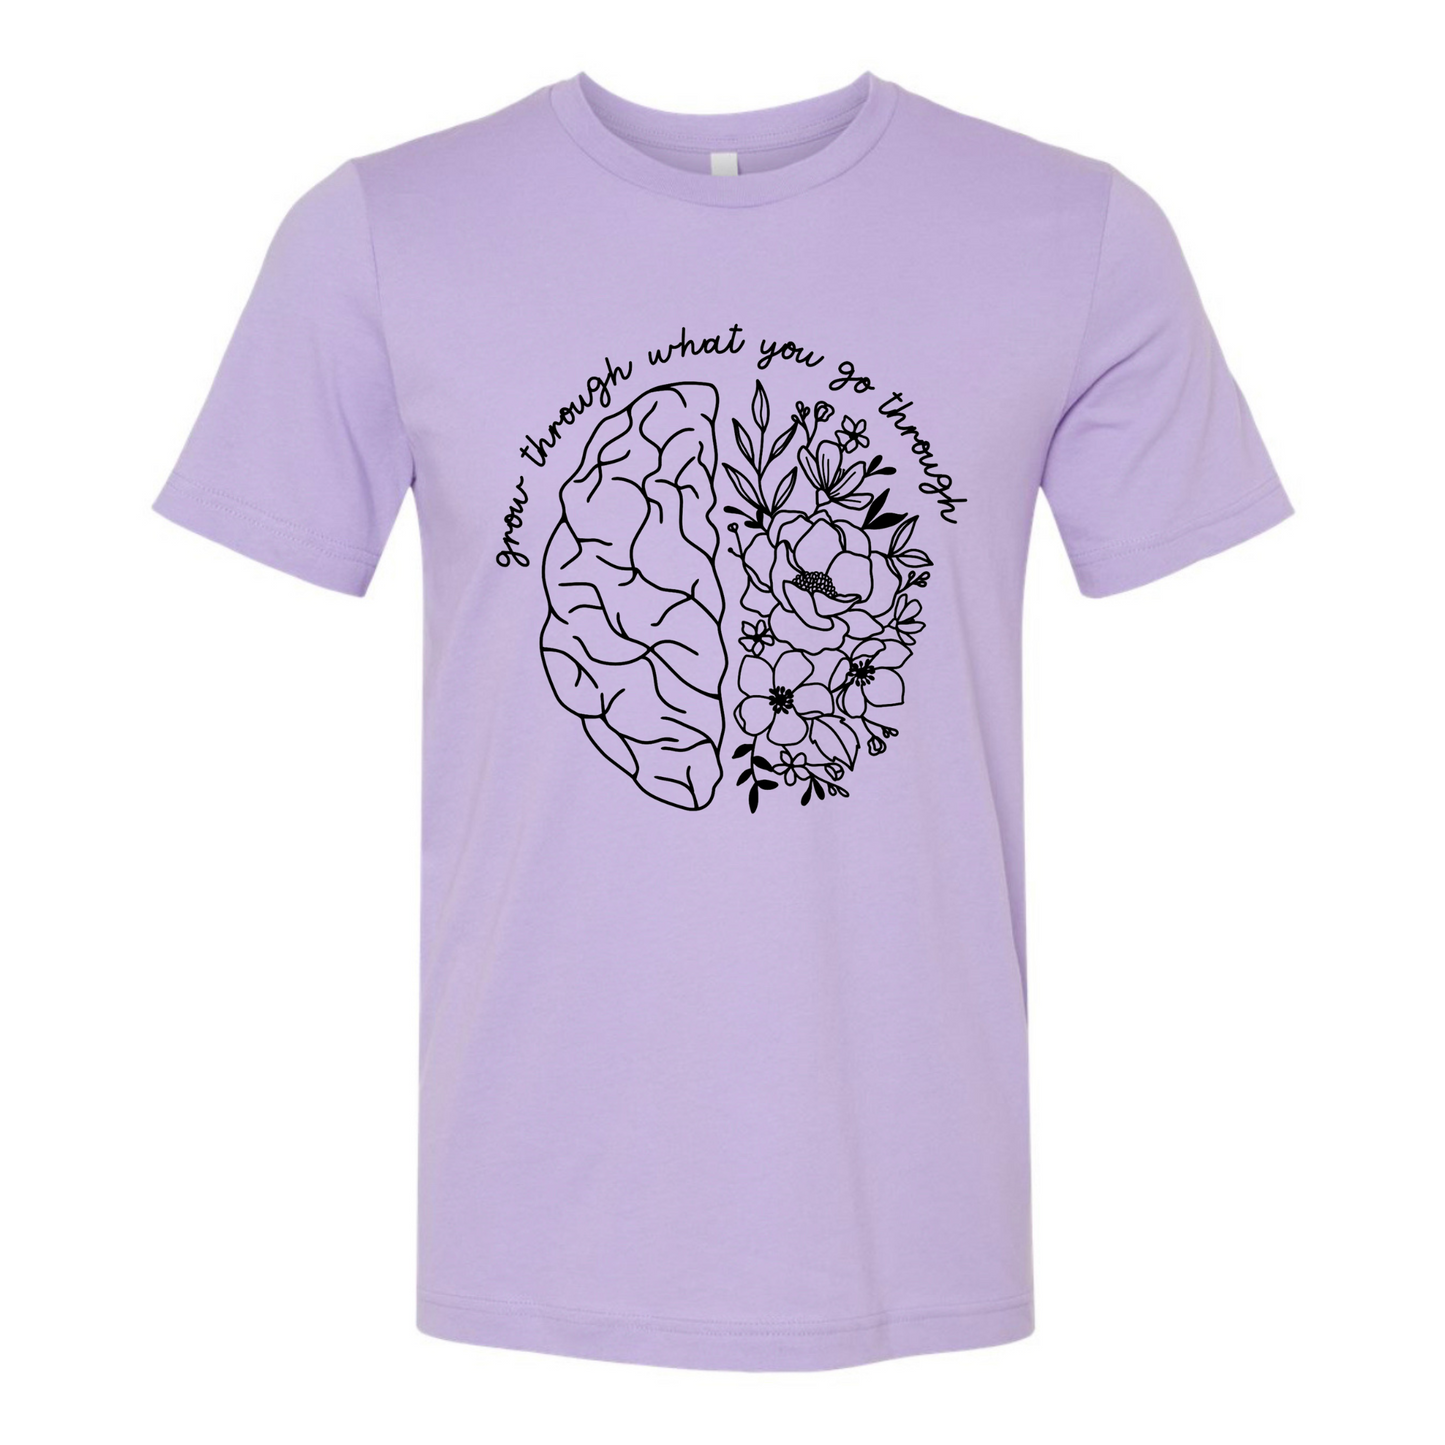 Grow Through Mental Health Brain T-Shirt in purple with a black design on the front. The design has a brain with the left side looking like a brain and the right side being flowers. At the top of the design has a cursive font that says "grow through what you go through". This is the front view of the shirt.